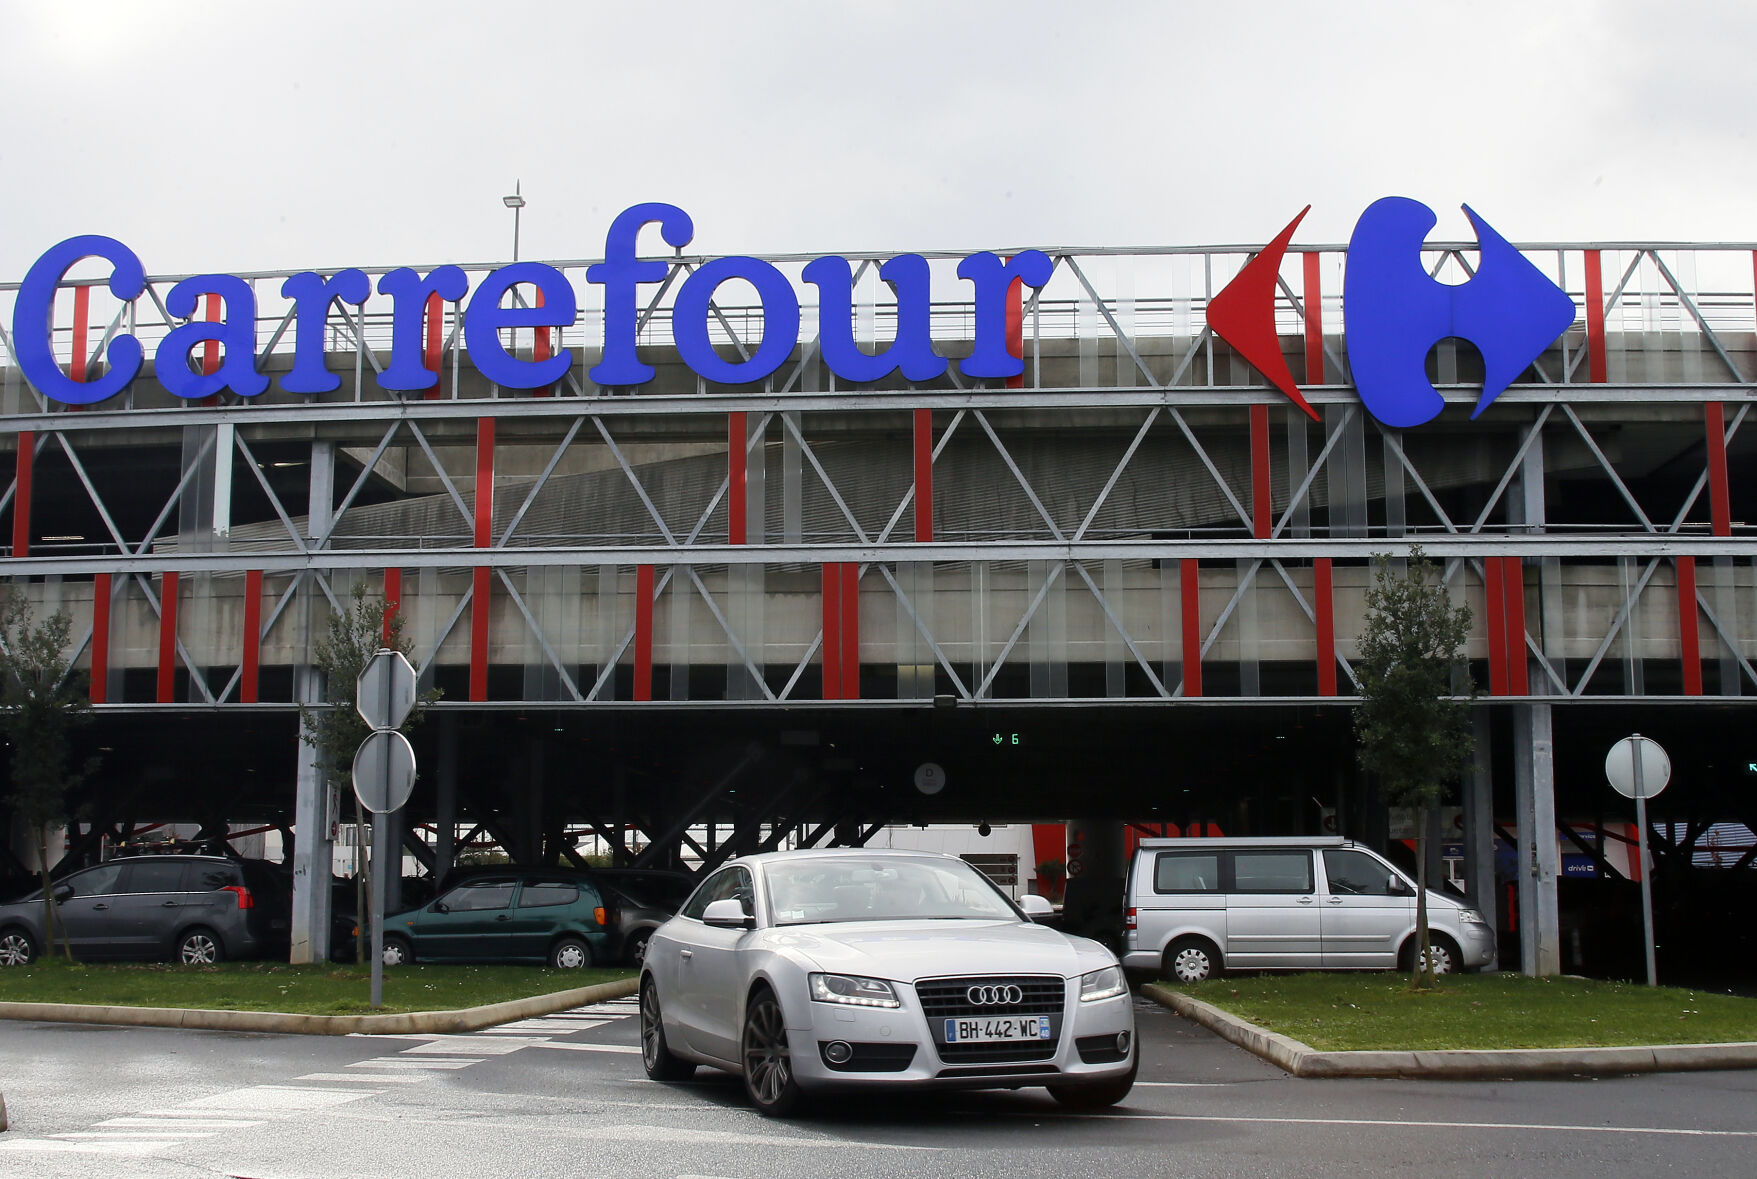 FILE - Car leaves a Carrefour supermarket in Anglet, southwestern France, on Jan.23, 2018. Global supermarket chain Carrefour will stop selling PepsiCo products in its stores in France, Belgium, Spain and Italy over price increases for popular items like Lay